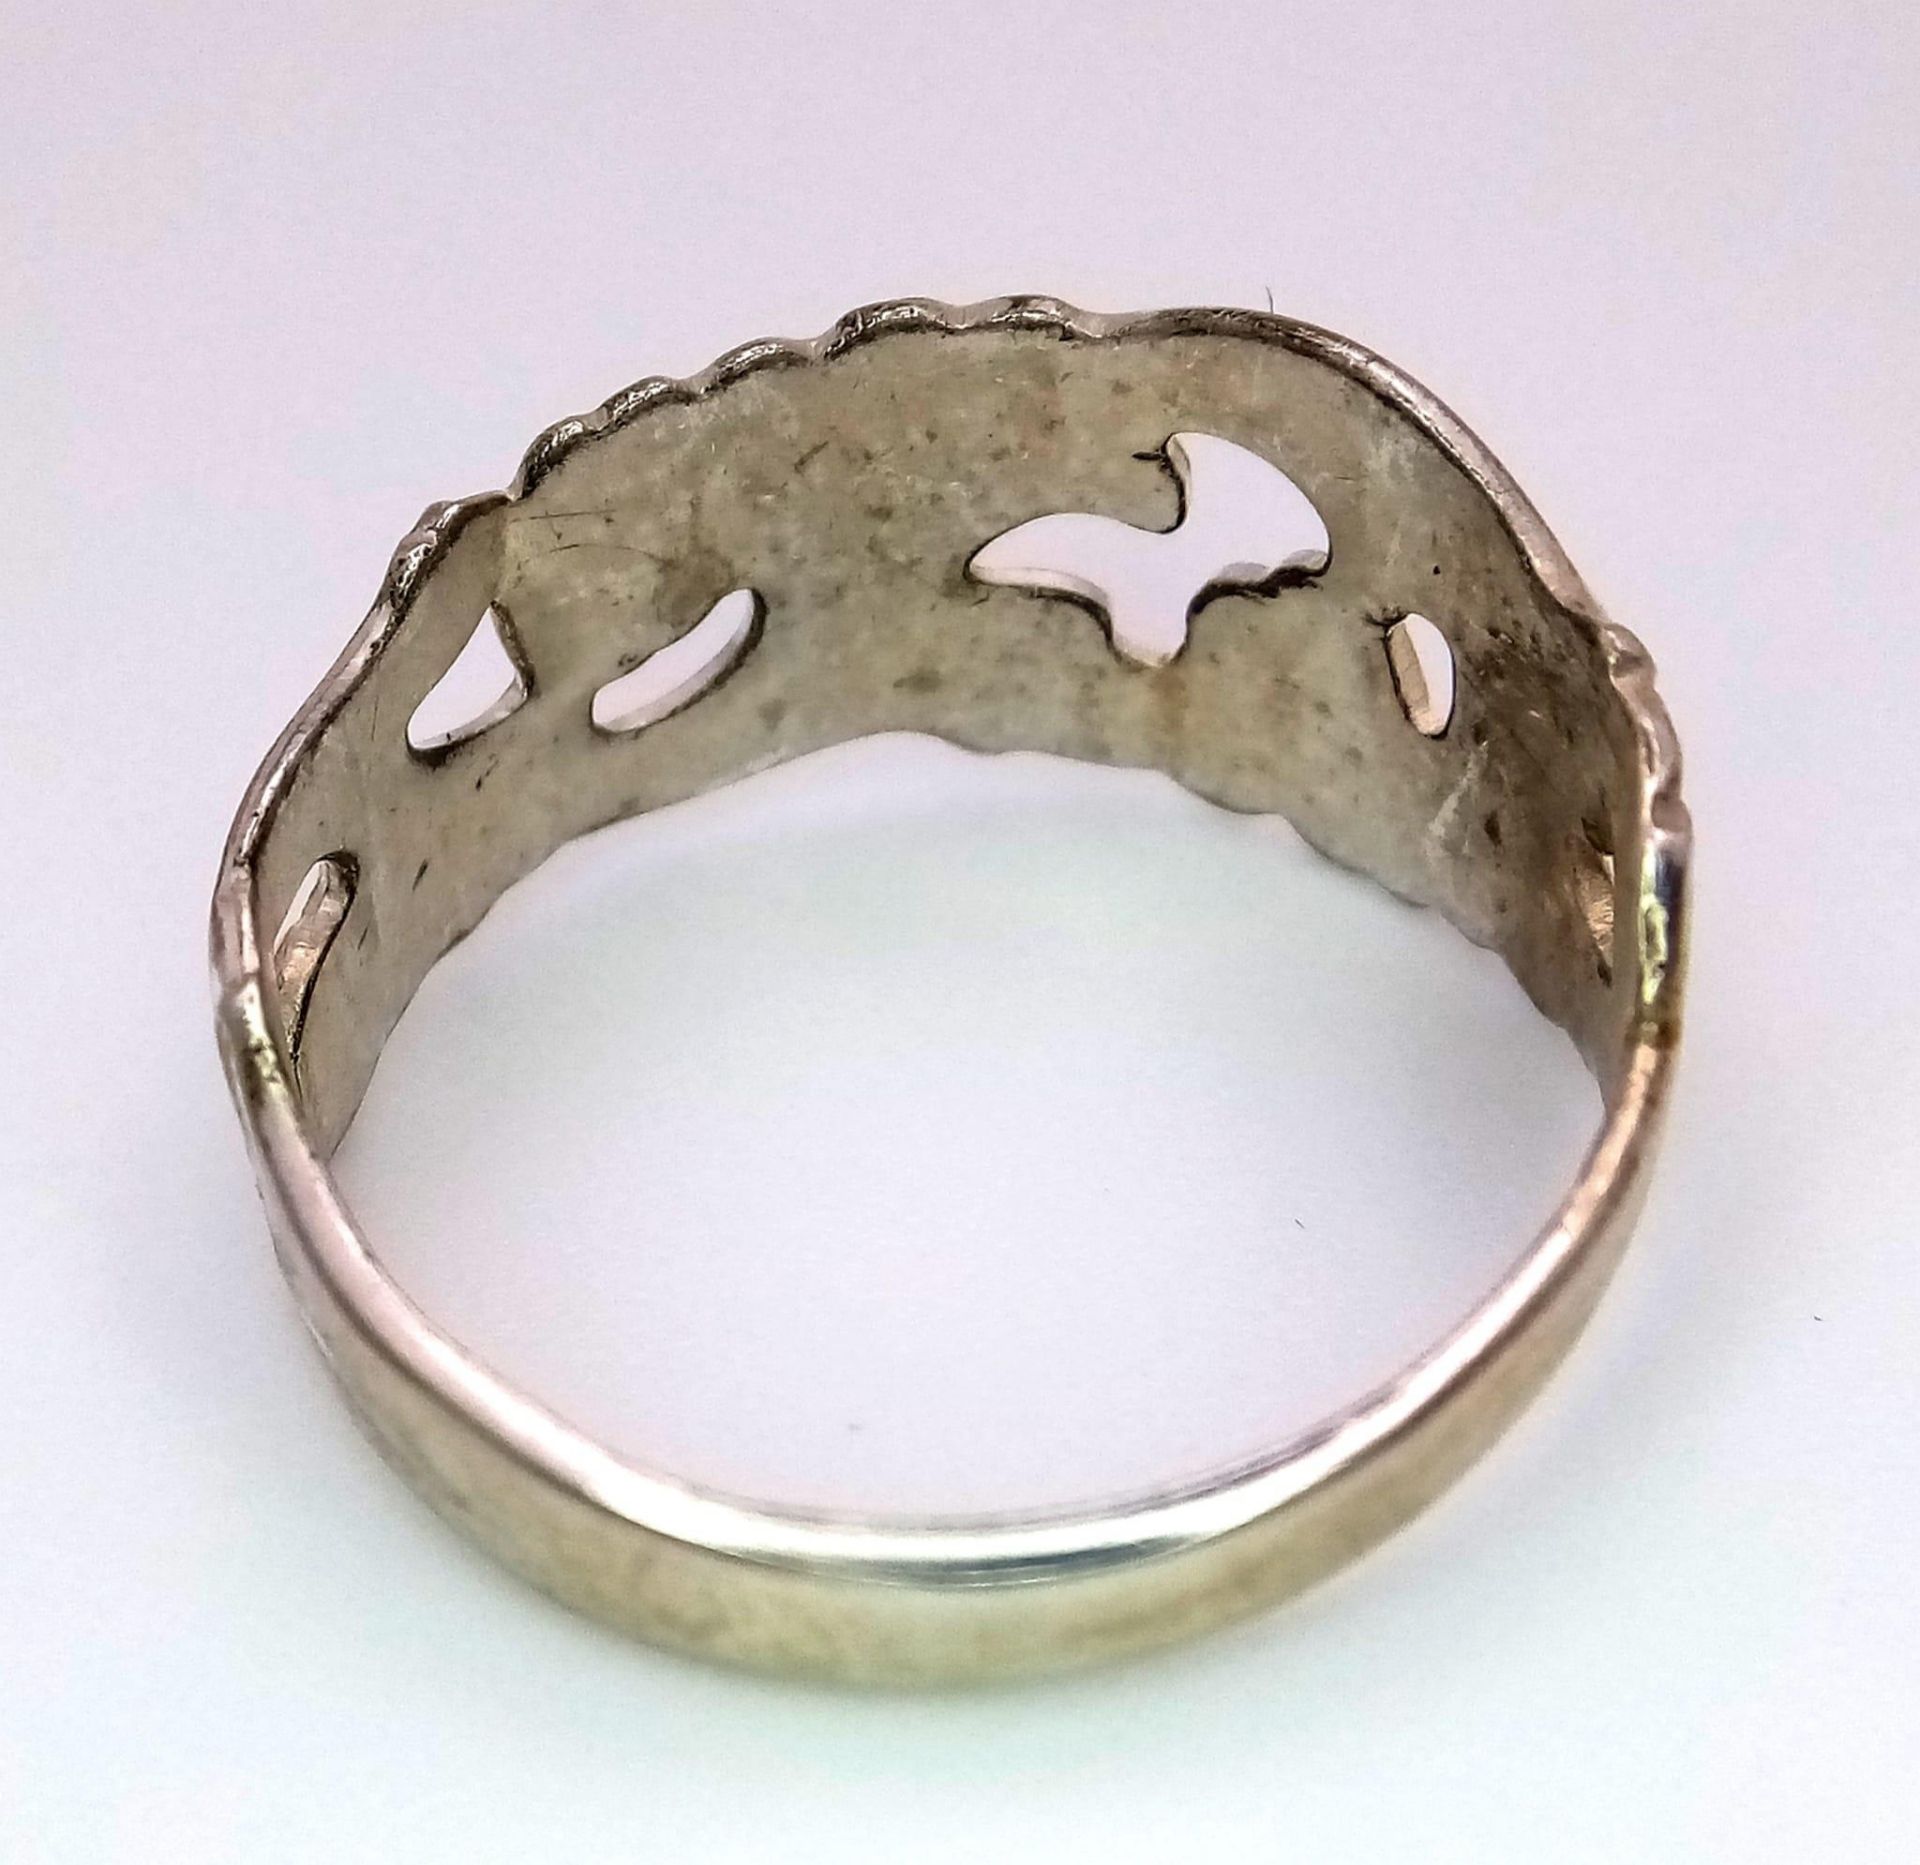 A STERLING SILVER RECYCYLED SPOON HANDLE RING. 4.2G SIZE Z. HAND CRAFTED BY ADAM - Image 3 of 4